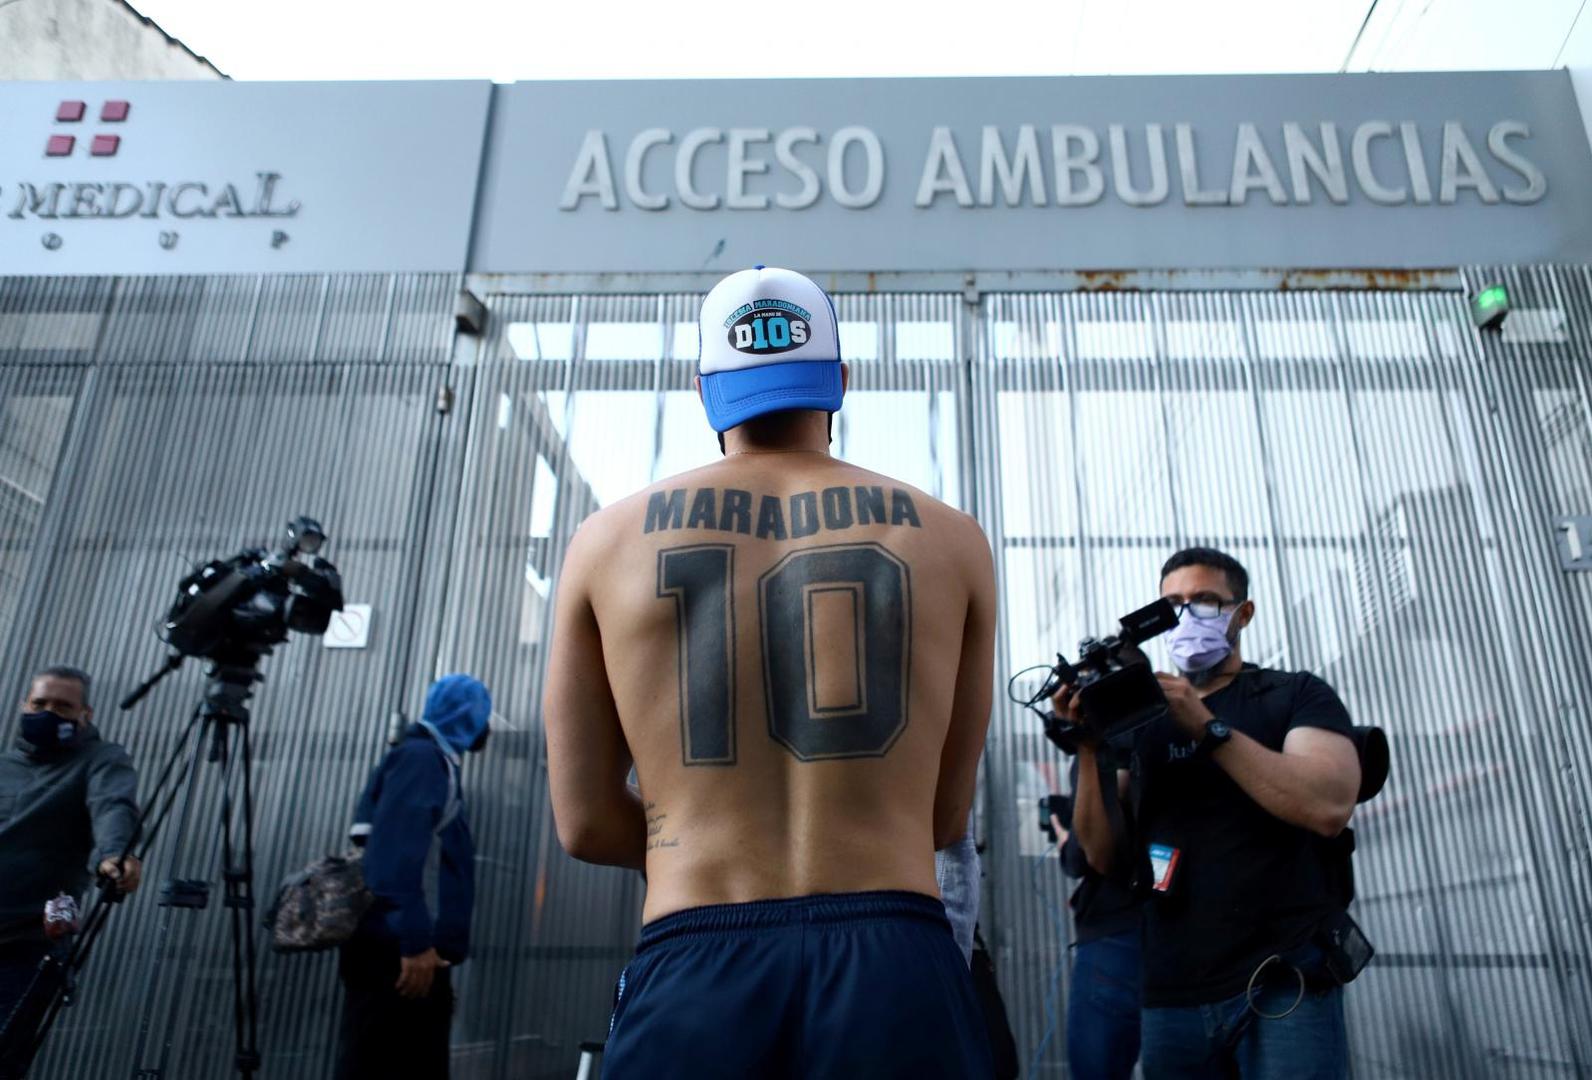 A fan of Argentine soccer great Diego Maradona stands outside the clinic where he will be undergoing surgery for a subdural haematoma, according to his personal physician, in Olivos A fan of Argentine soccer great Diego Maradona stands outside the clinic where he will be undergoing surgery for a subdural haematoma, according to his personal physician, in Olivos, on the outskirts of Buenos Aires, Argentina November 3, 2020. REUTERS/Matias Baglietto MATIAS BAGLIETTO